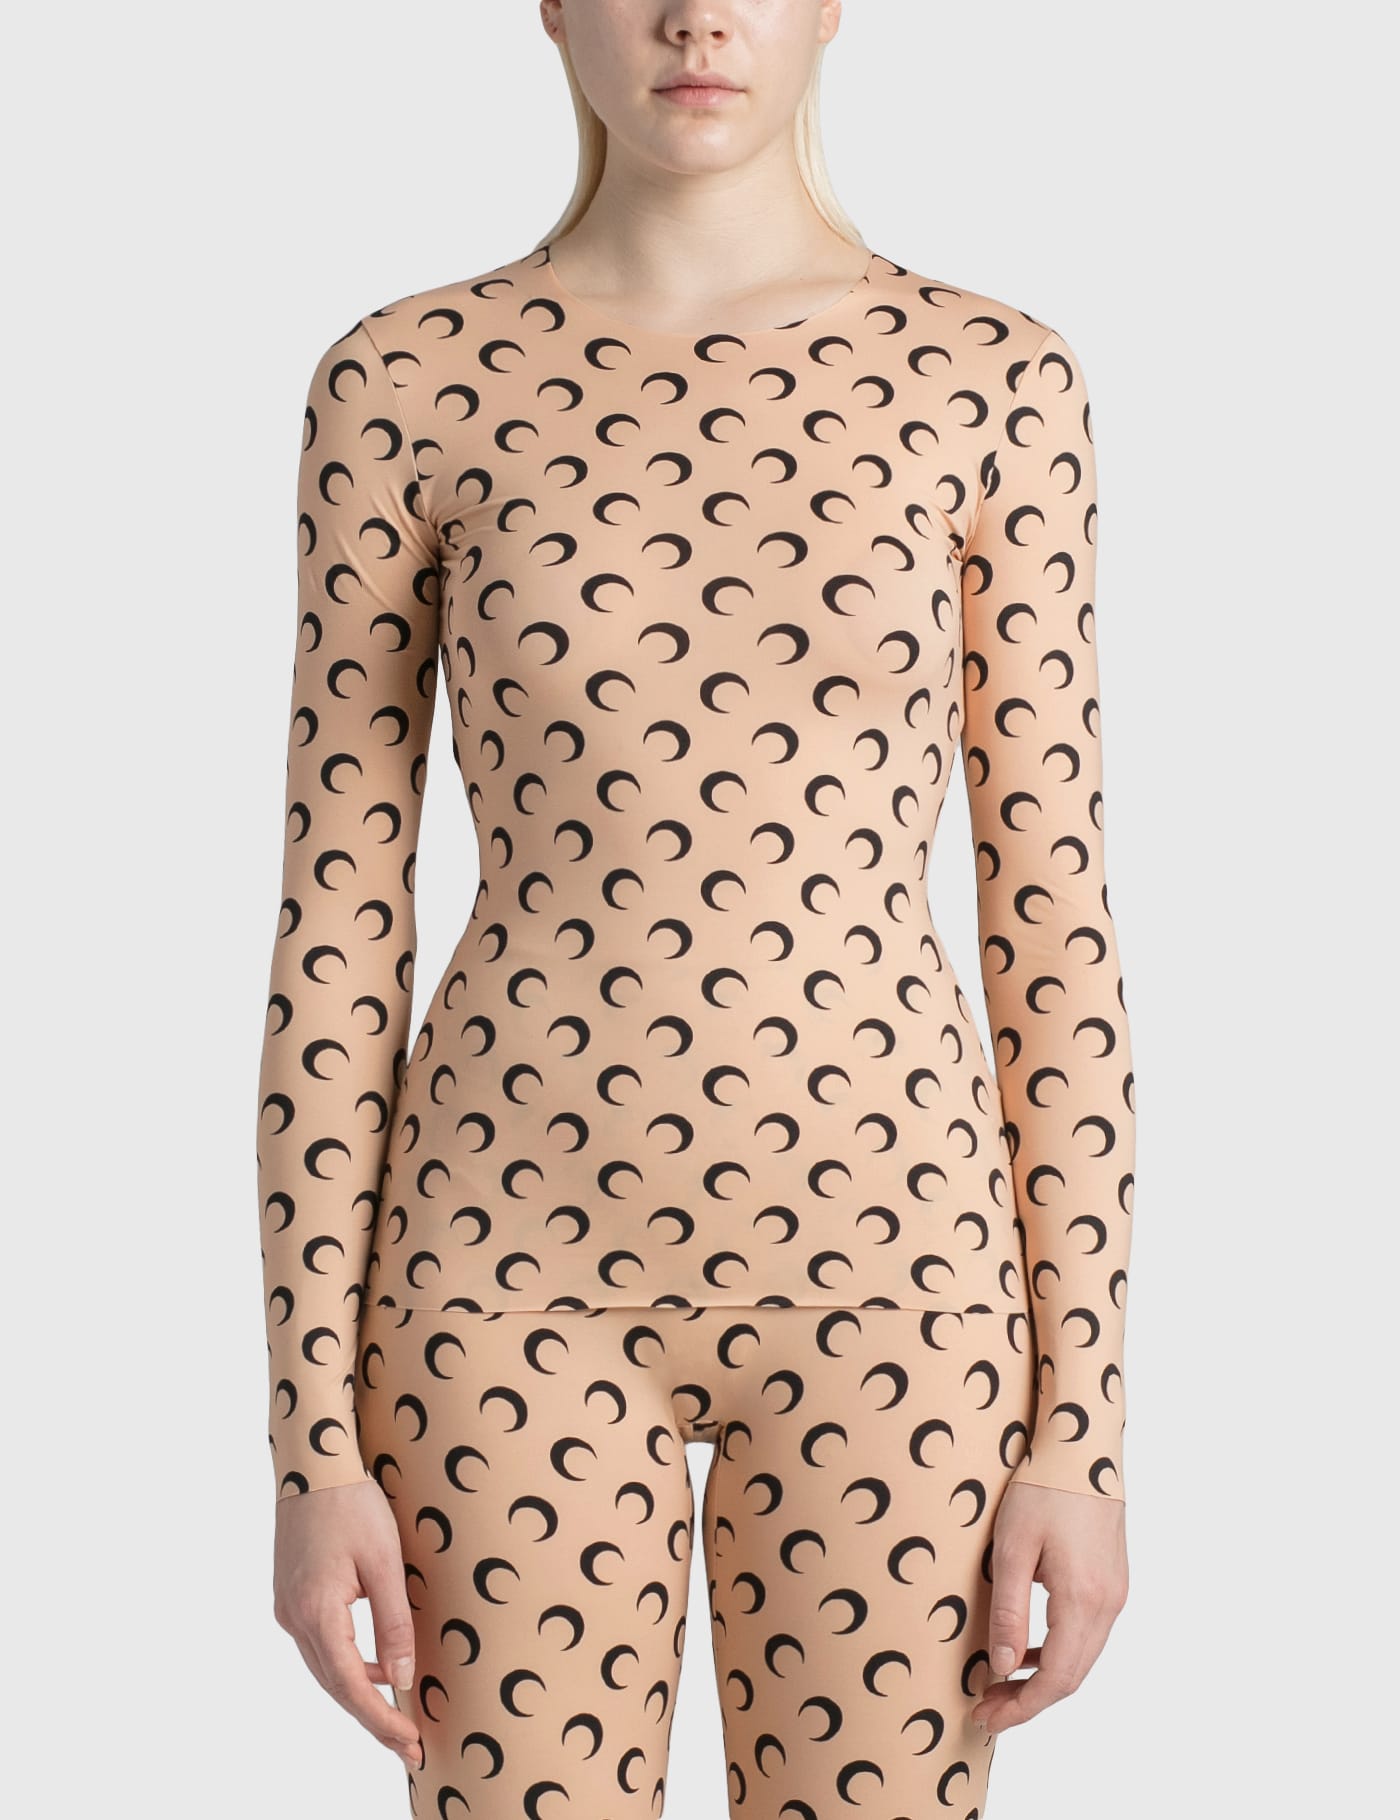 Marine Serre - Second Skin Moon Top | HBX - Globally Curated